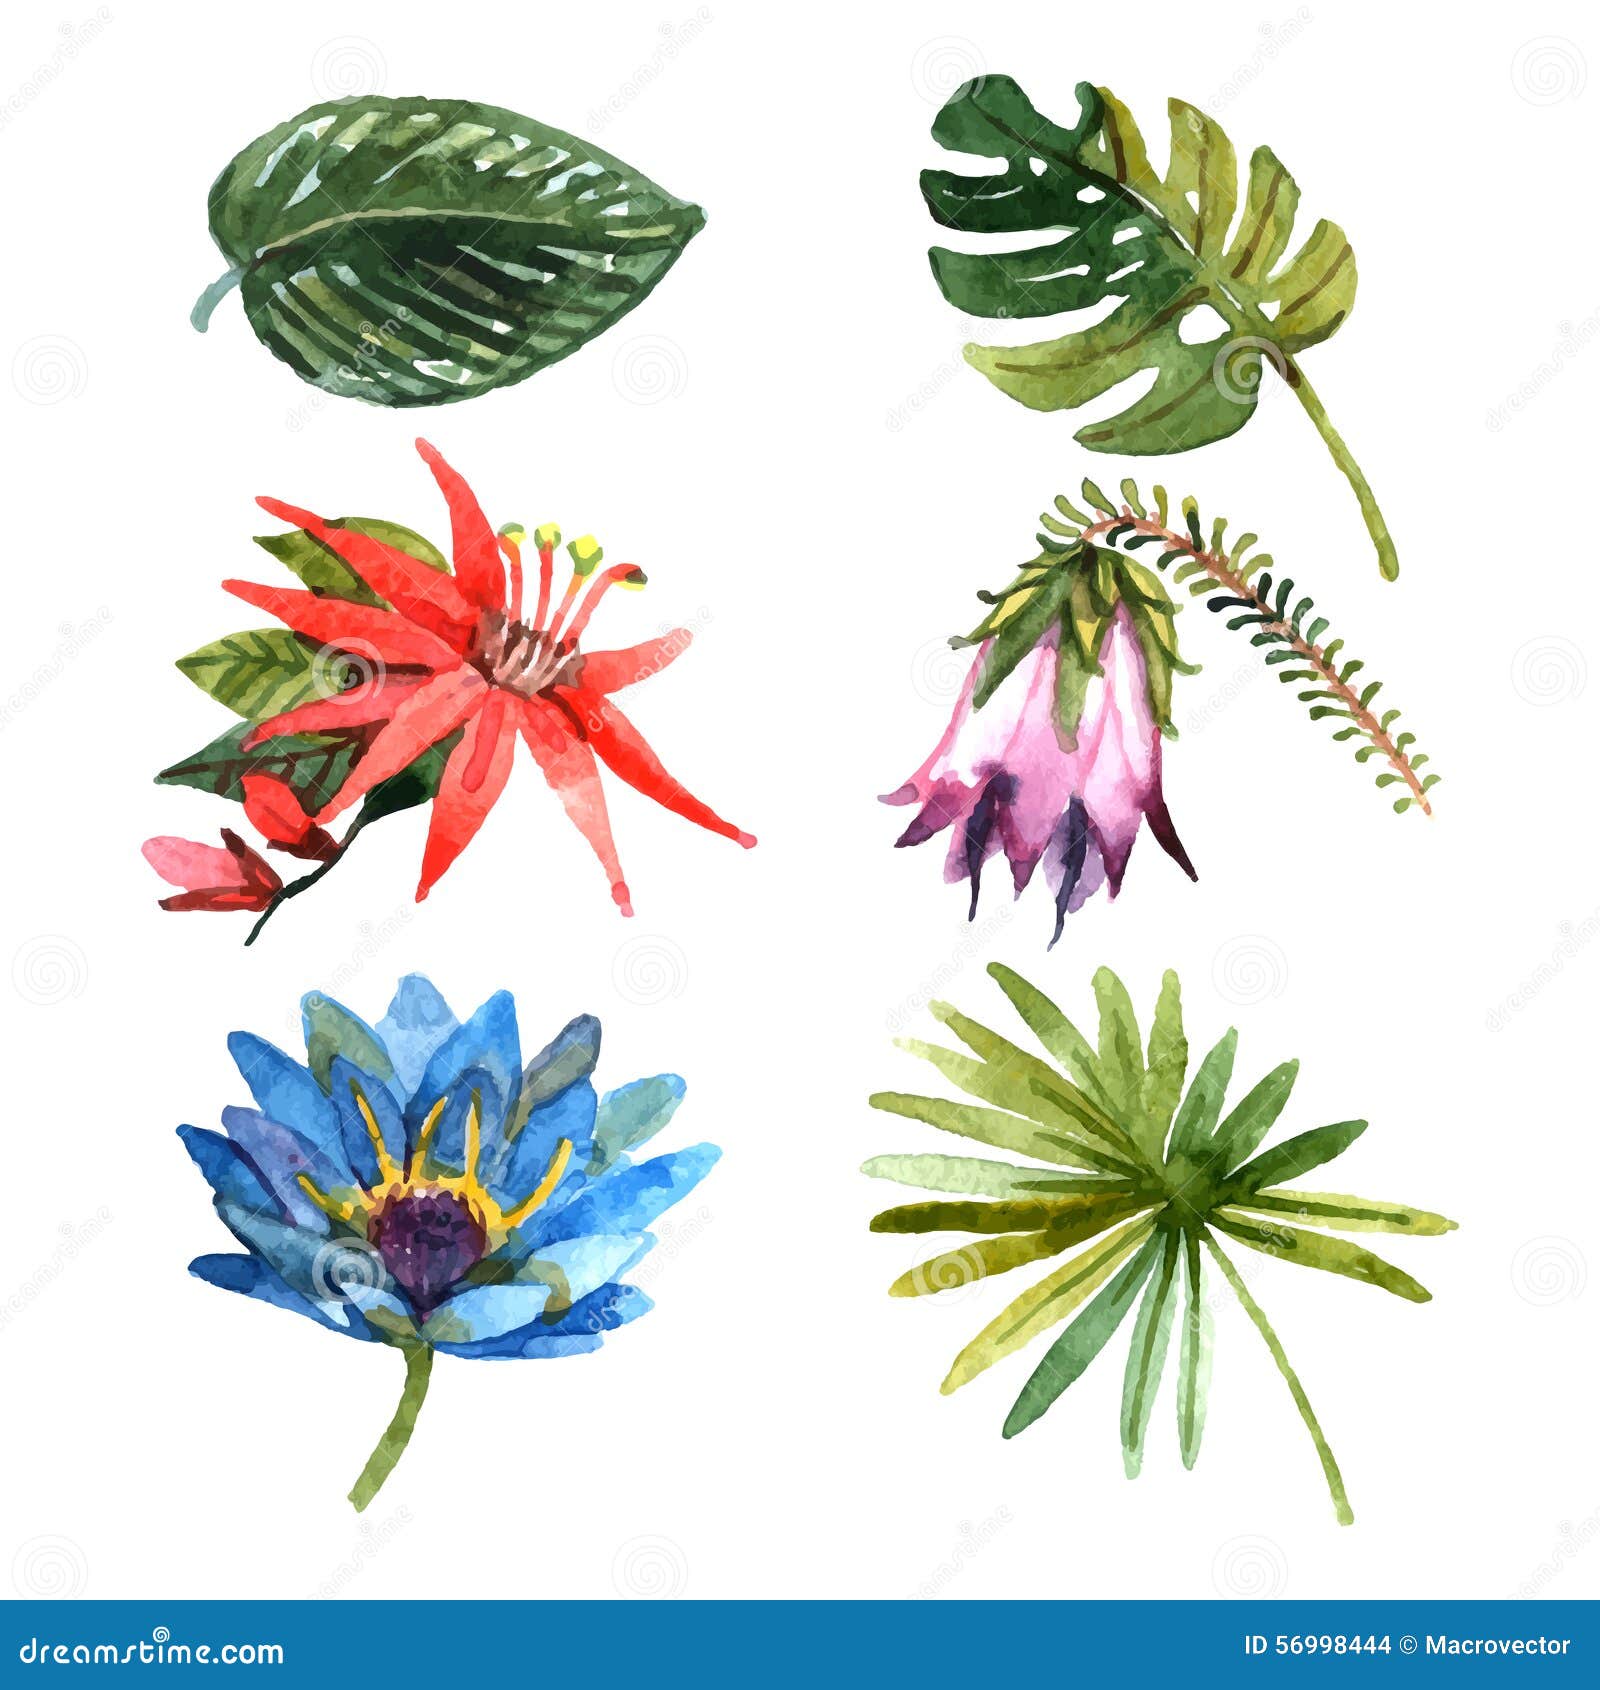 How to Draw a Tropical Flower Easy  YouTube